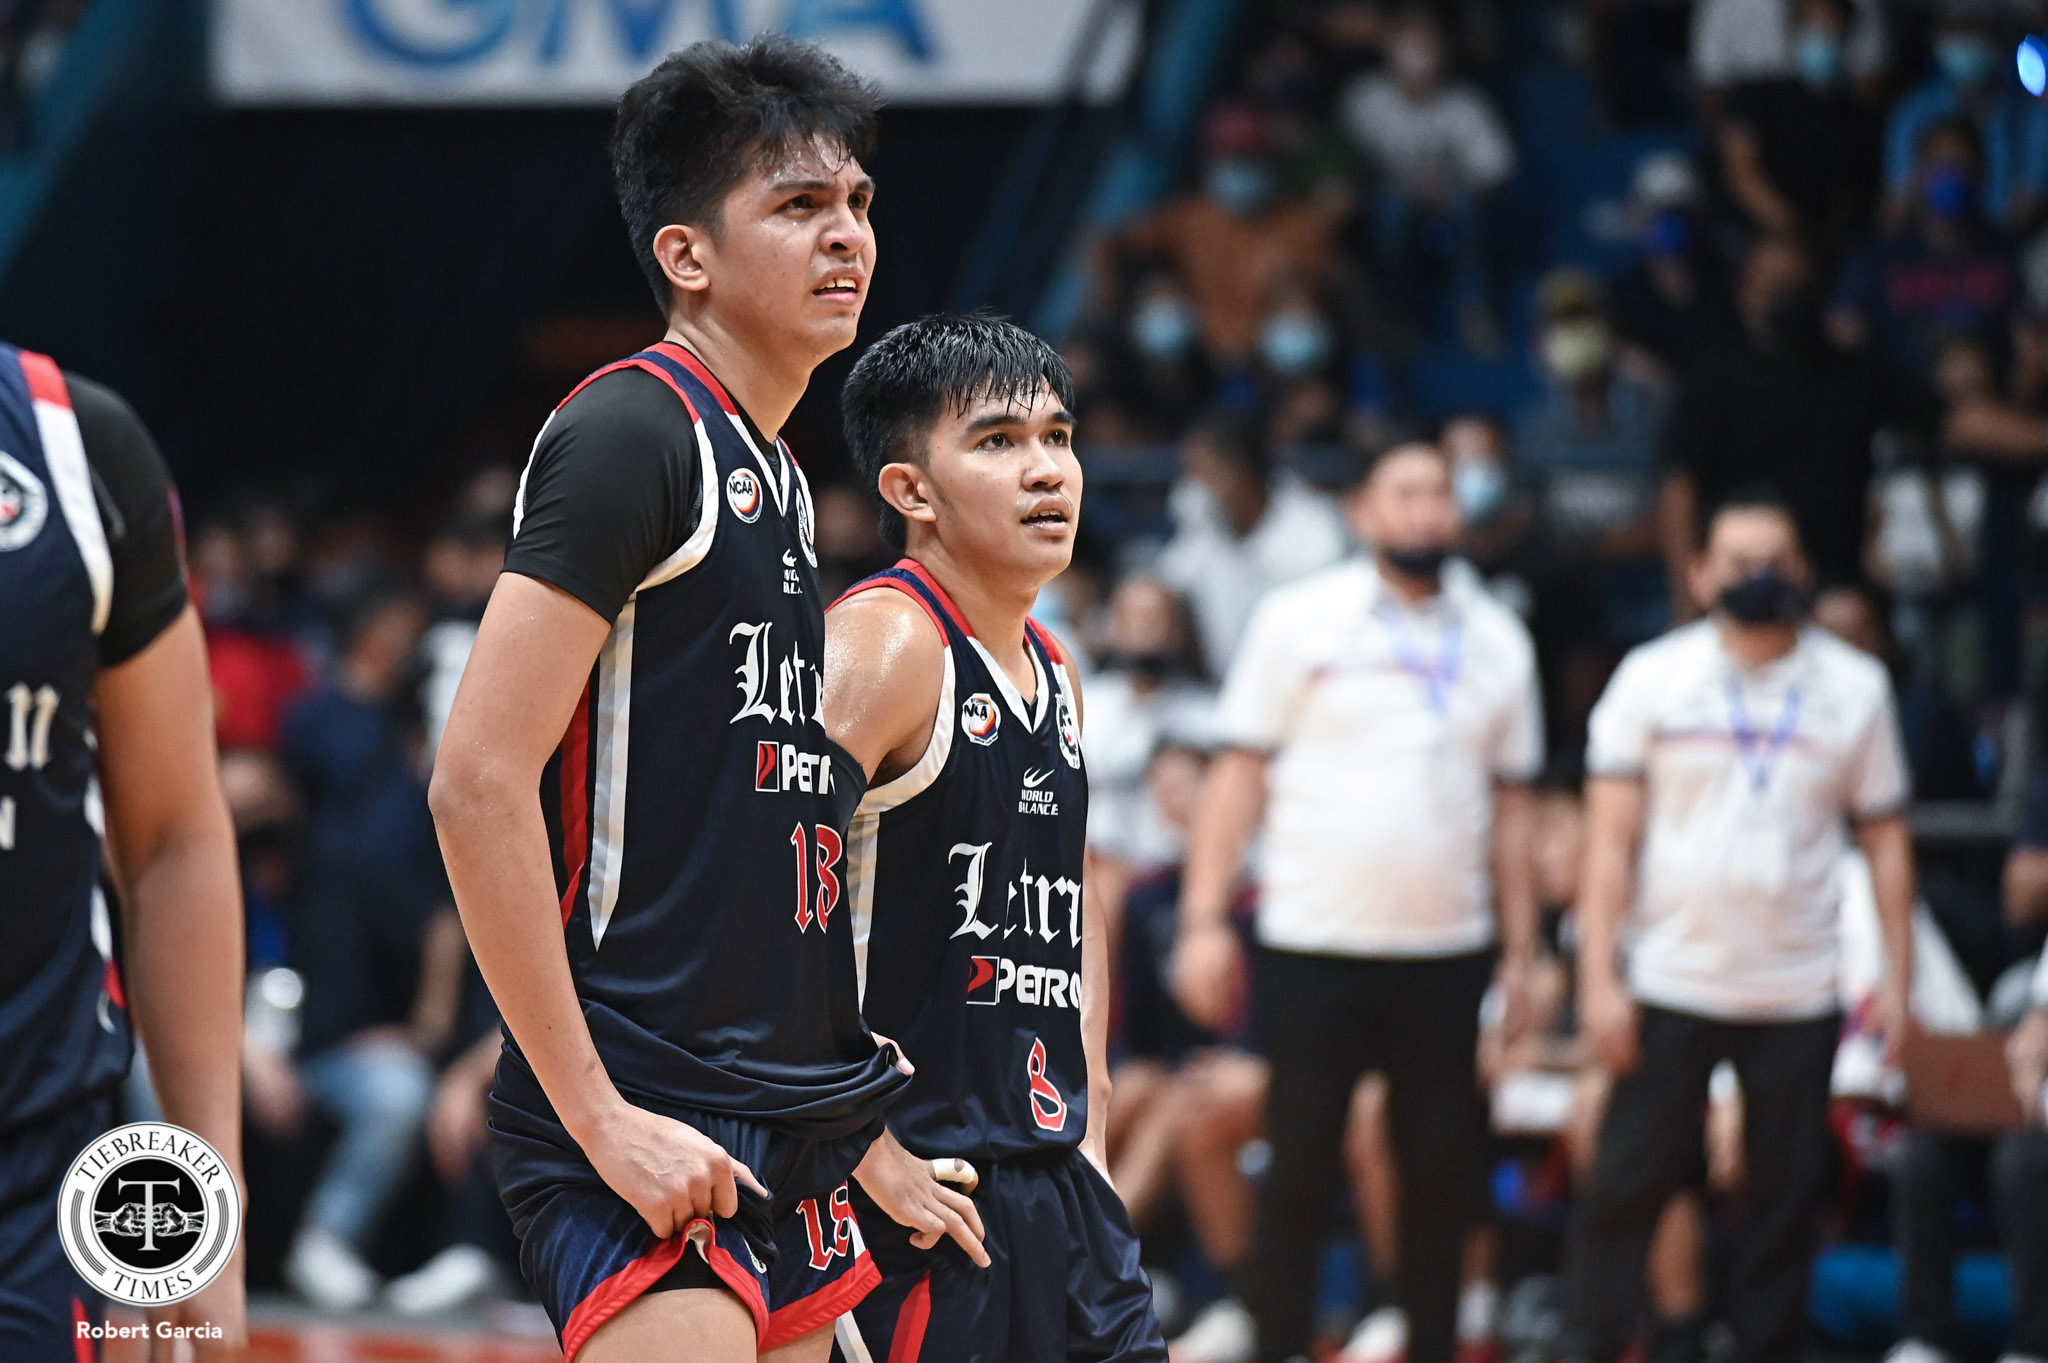 NCAA-97-MU-VS-CSJL-AMBOHOT-AND-REYSON Jeo Ambohot leaves legacy in Letran before heading to Converge Basketball CSJL NCAA News  - philippine sports news